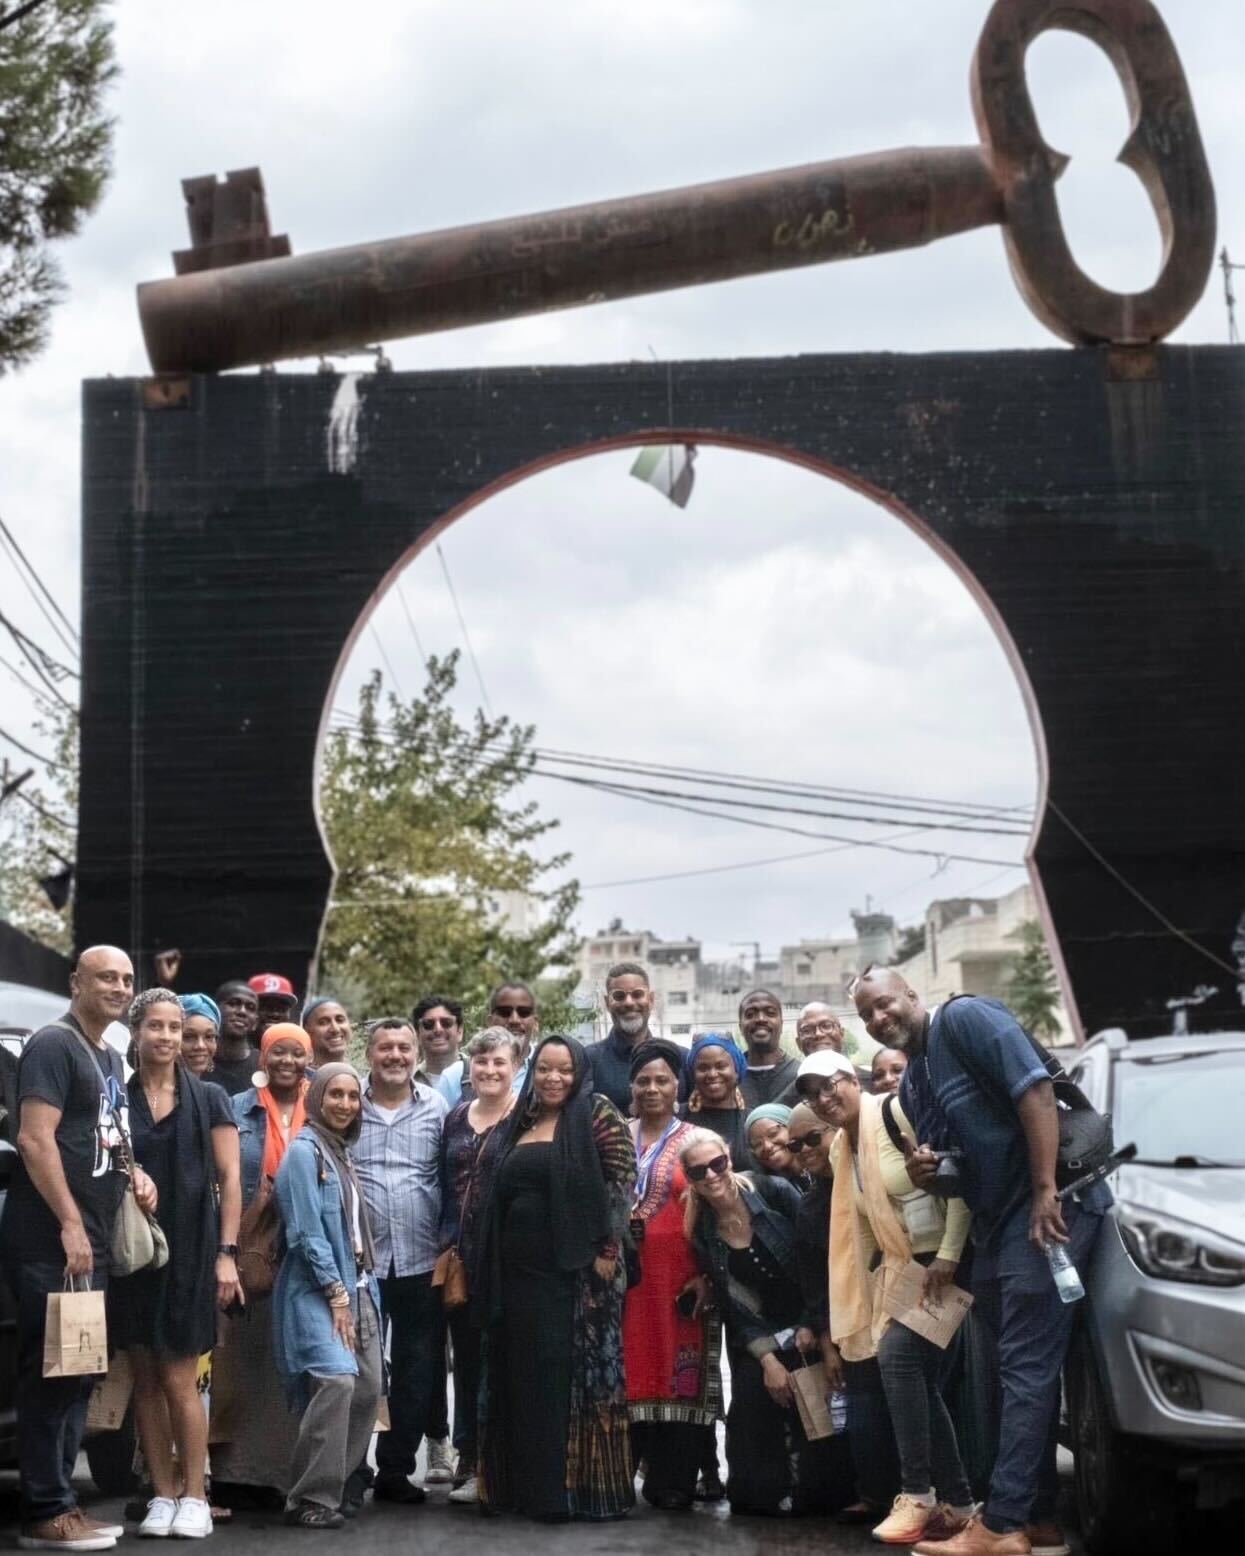 A group photo in front of a huge, iron 